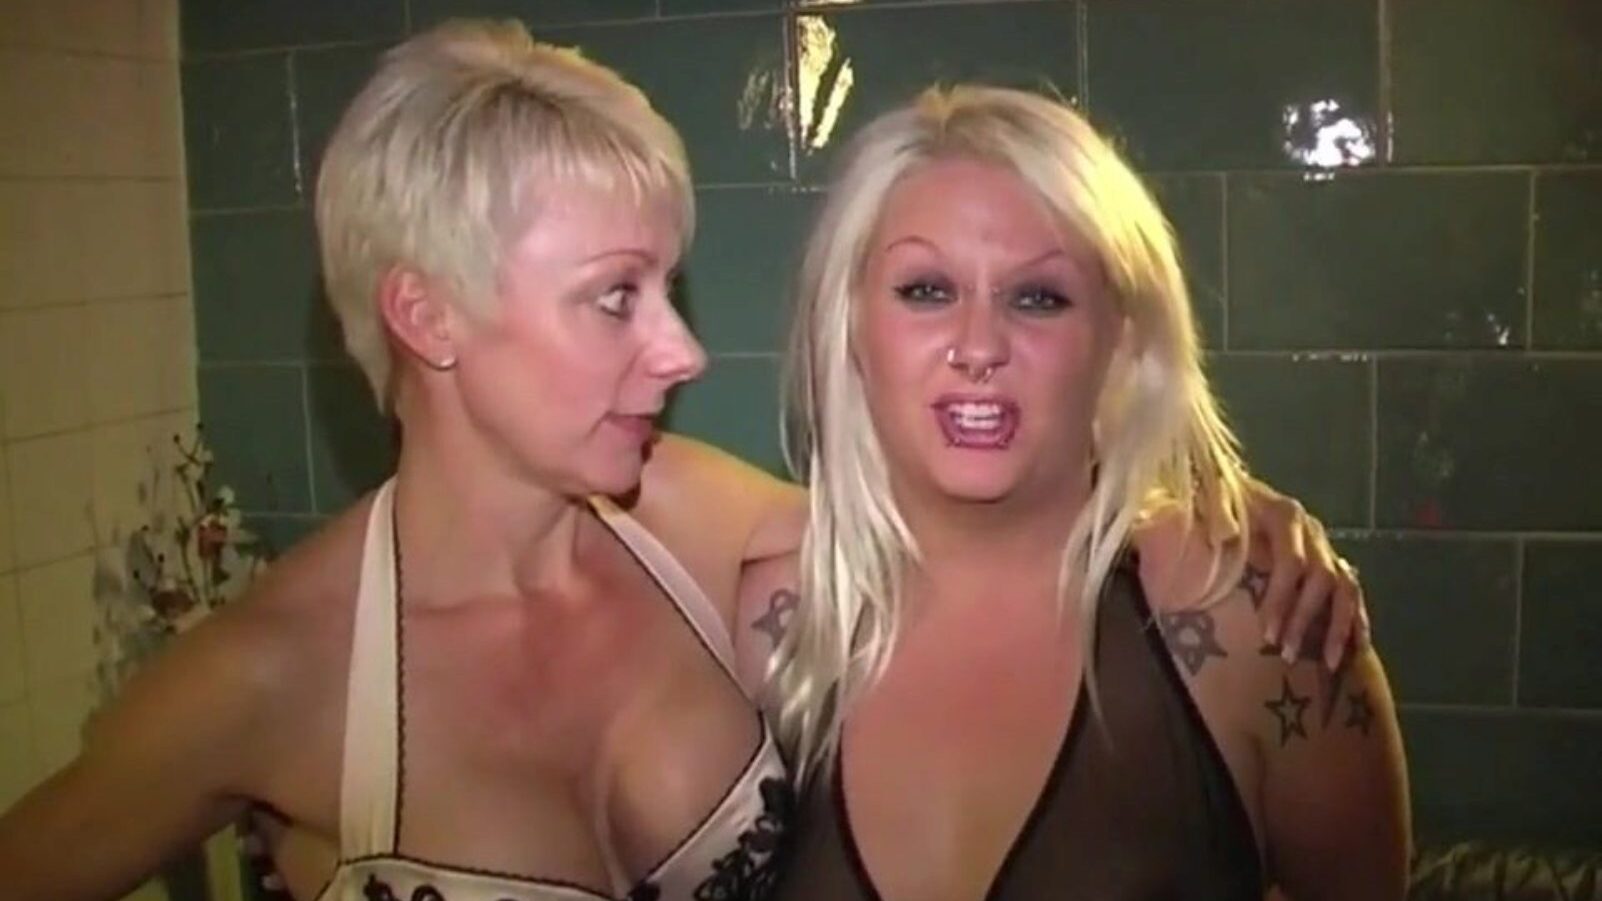 blastfrompast7: free afuk hd porn video 62 - xhamster watch blastfrompast7 tube bang-out clip for for-for-all on xhamster, with the hotest collection of brit afuk, orgazmus és barátok hd pornográf klip szekvenciák